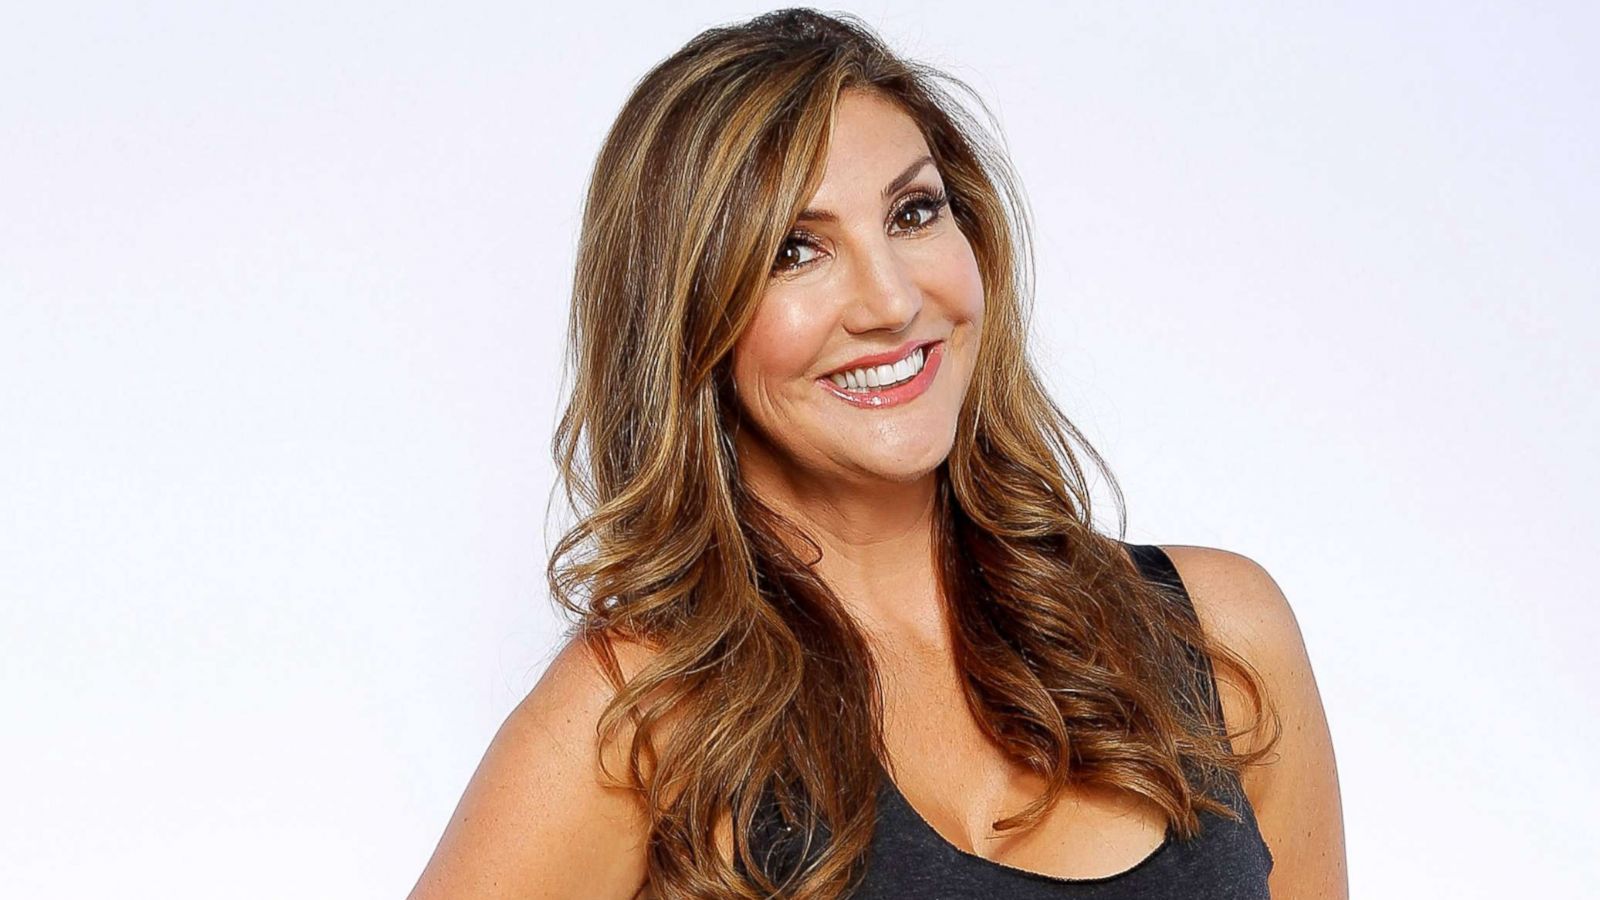 Heather McDonald Biography Height Weight Age Movies Husband Family Salary Net Worth Facts More